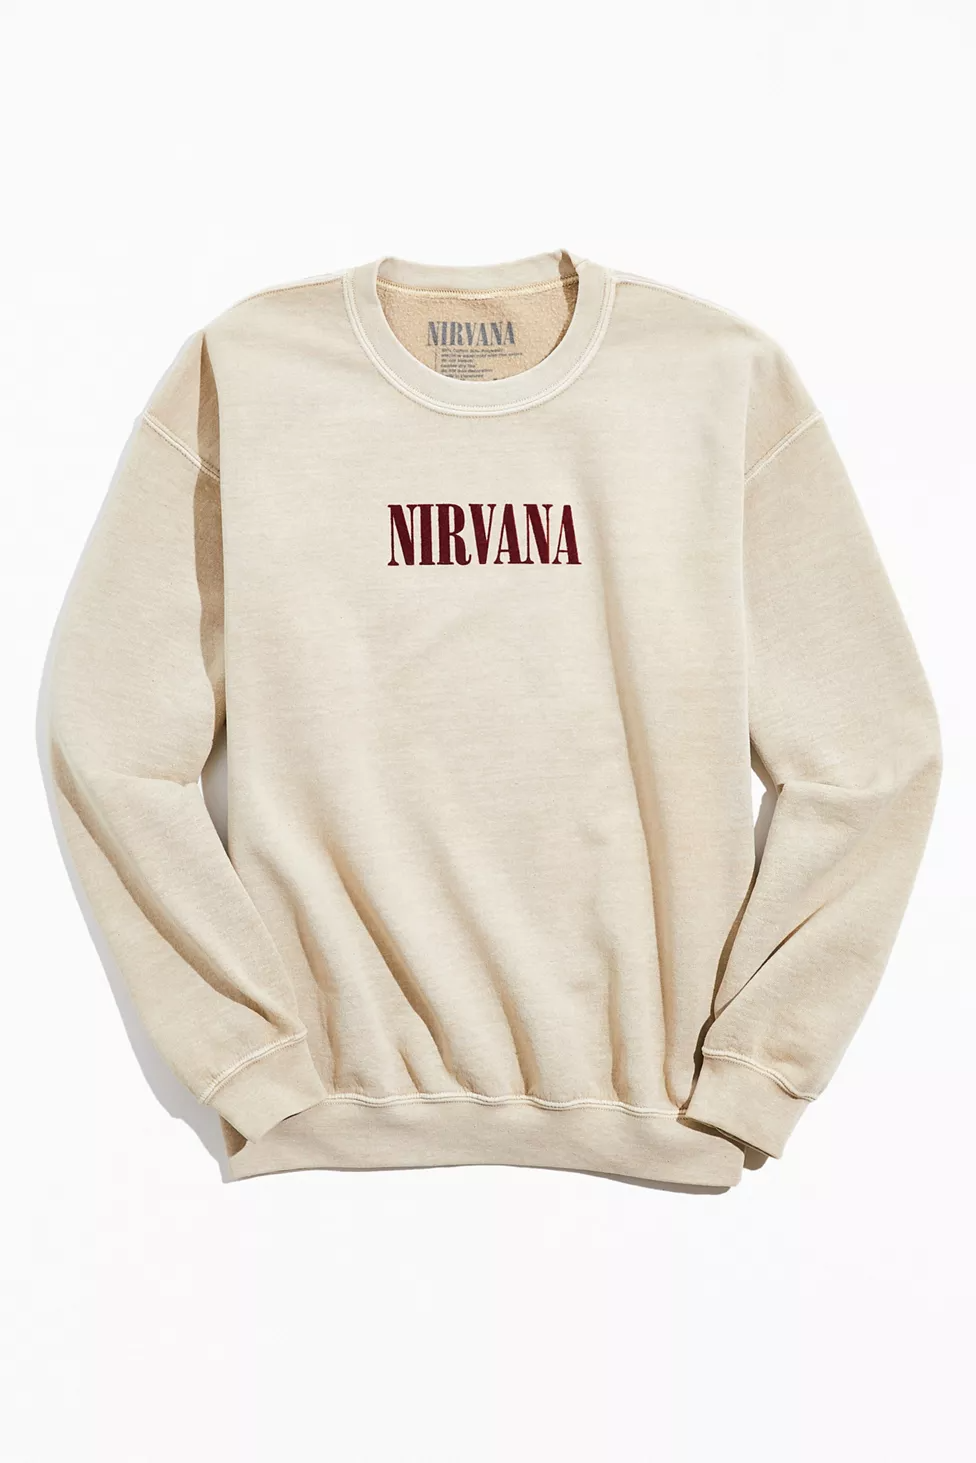 Have A
Cool Crew Neck Sweatshirt For Winters